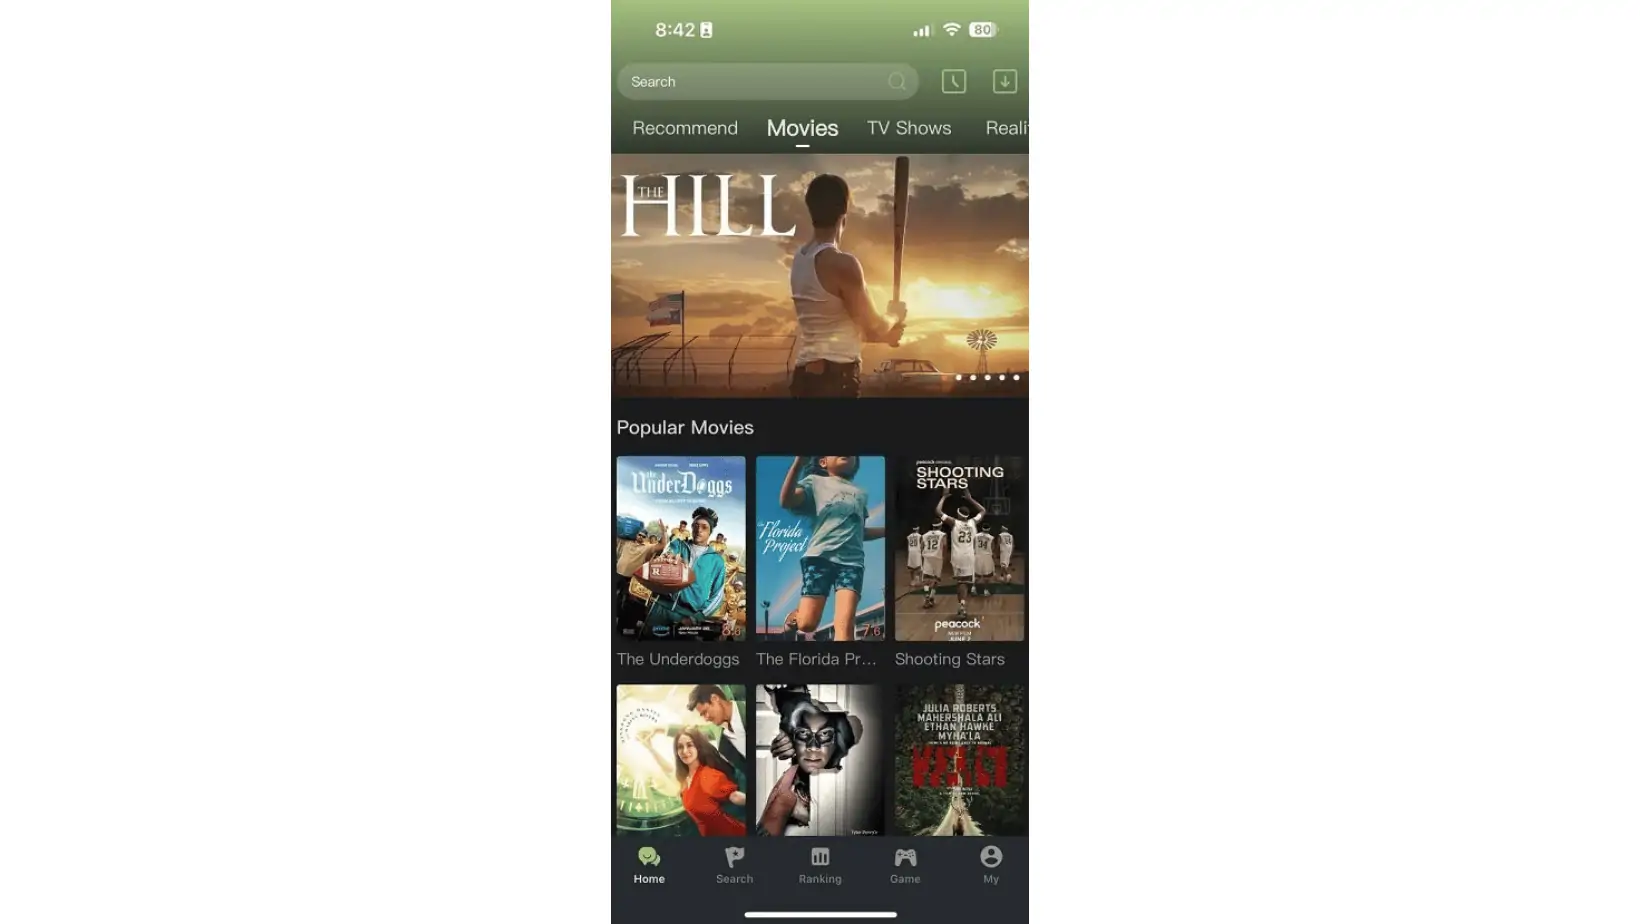 Pirated Movie Streaming App Kimi Sneaks into Apple App Store’s Top Charts